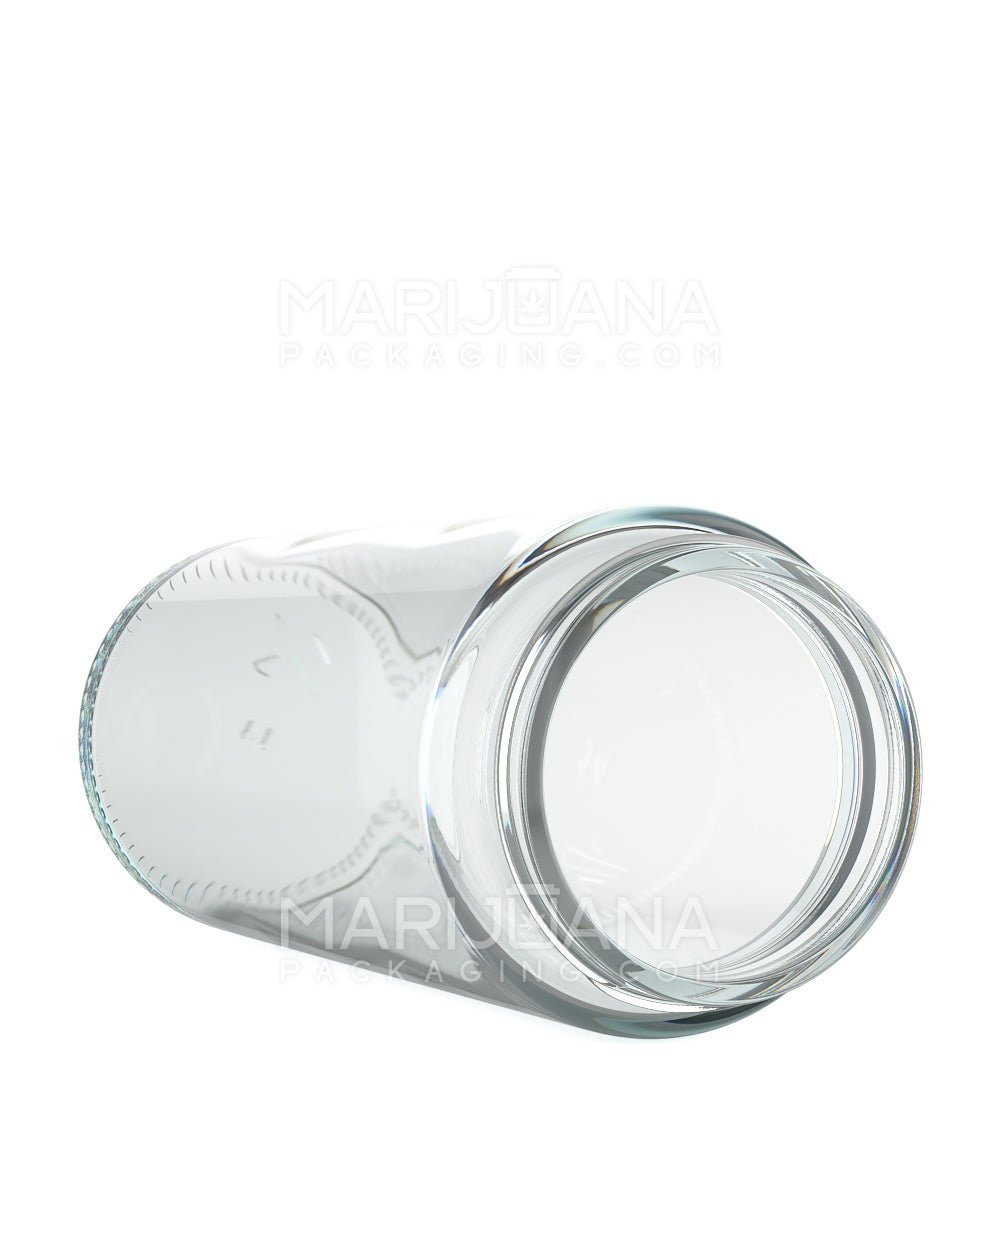 POLLEN GEAR | Kolossus Straight Sided Clear Glass Jars | 62mm - 15oz - 30 Count - 3